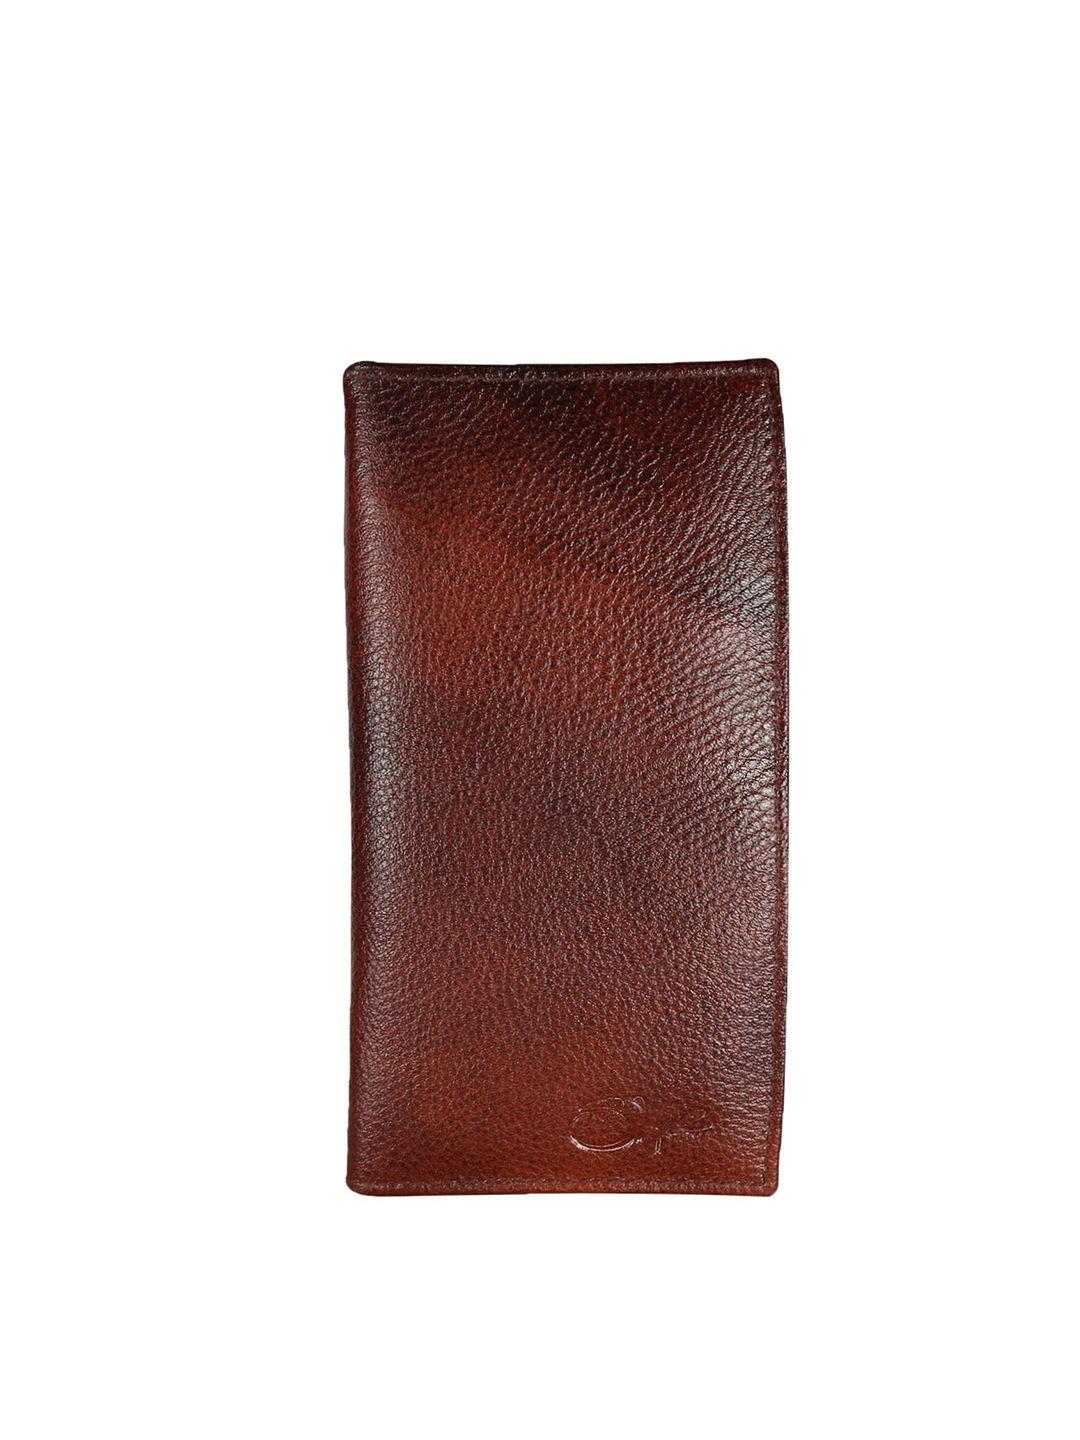 style shoes unisex leather two fold wallet